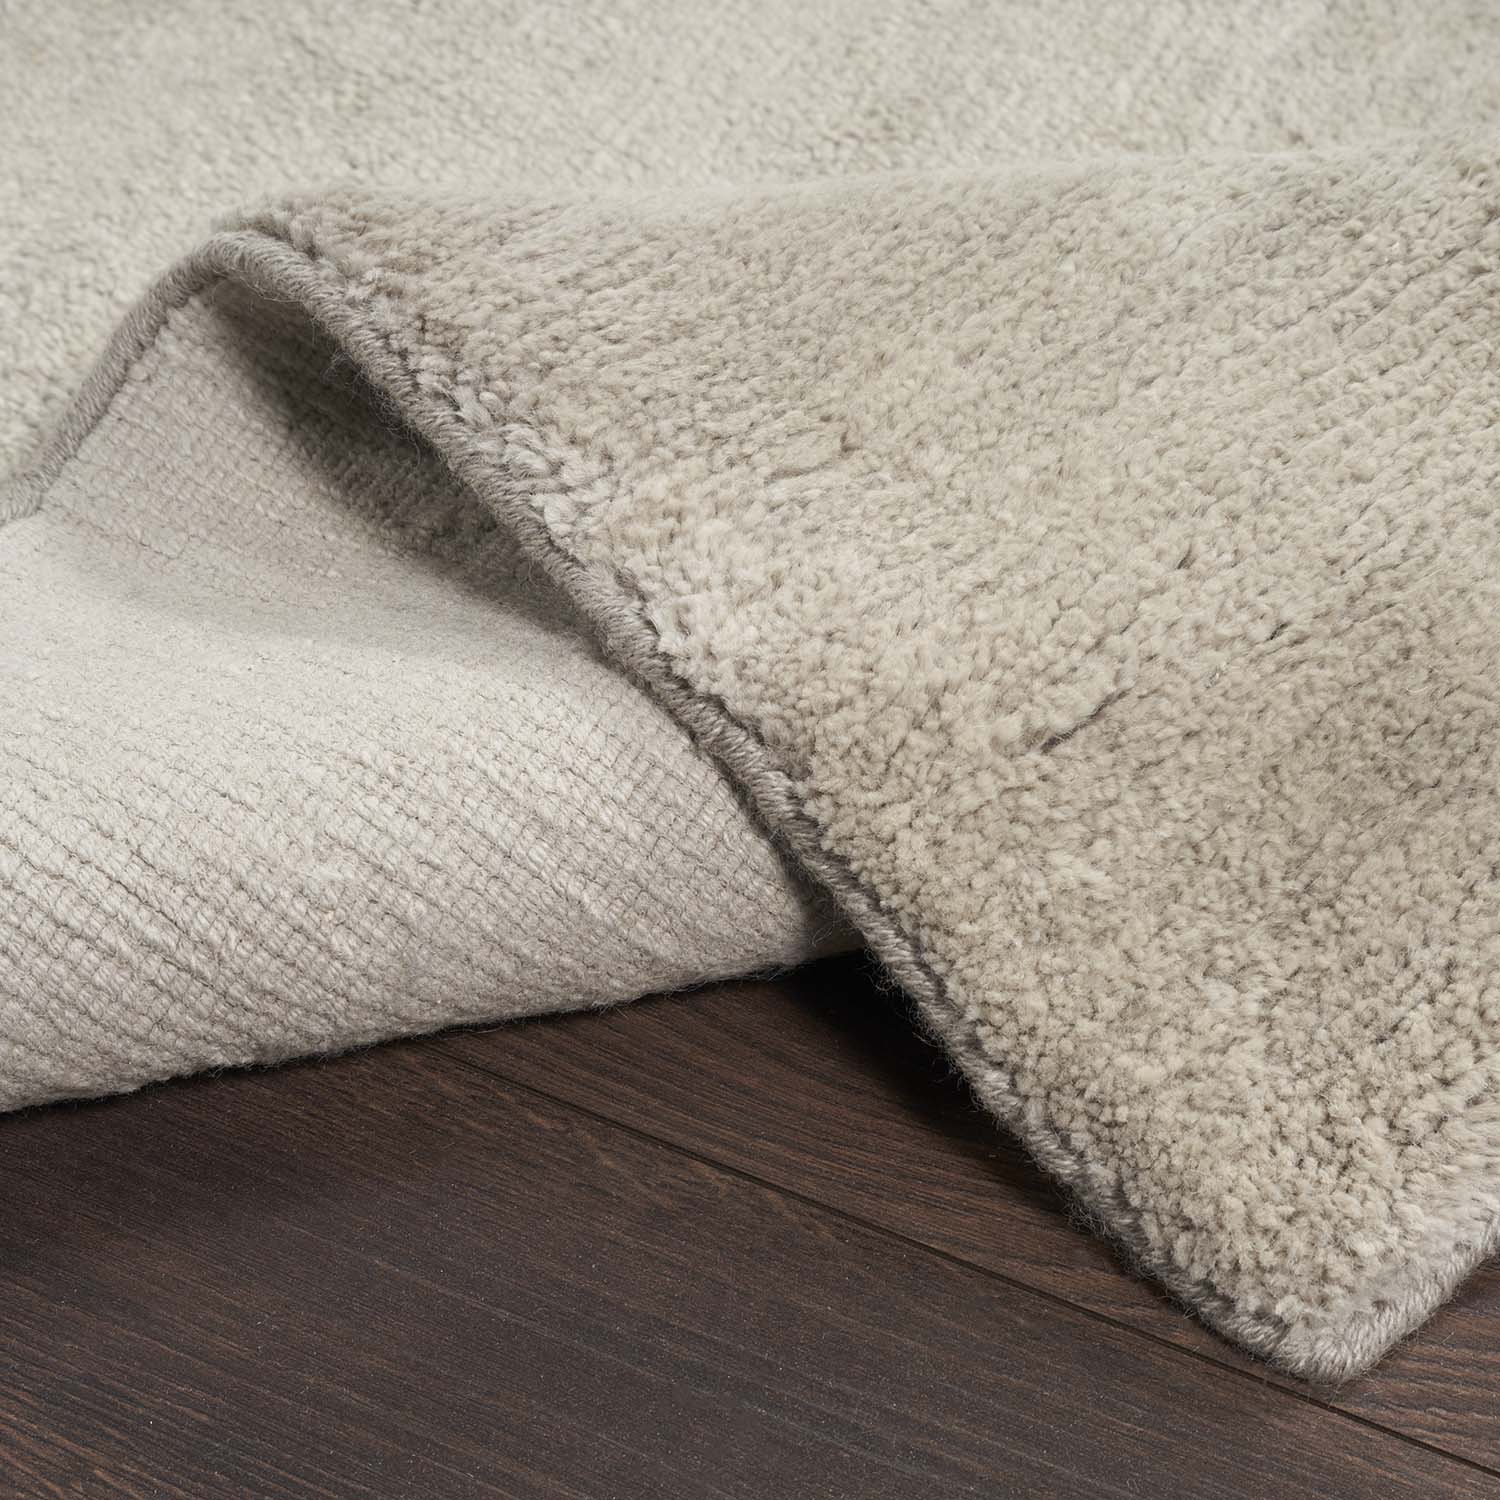 Cozy blanket with fluffy texture resting on a wooden surface.